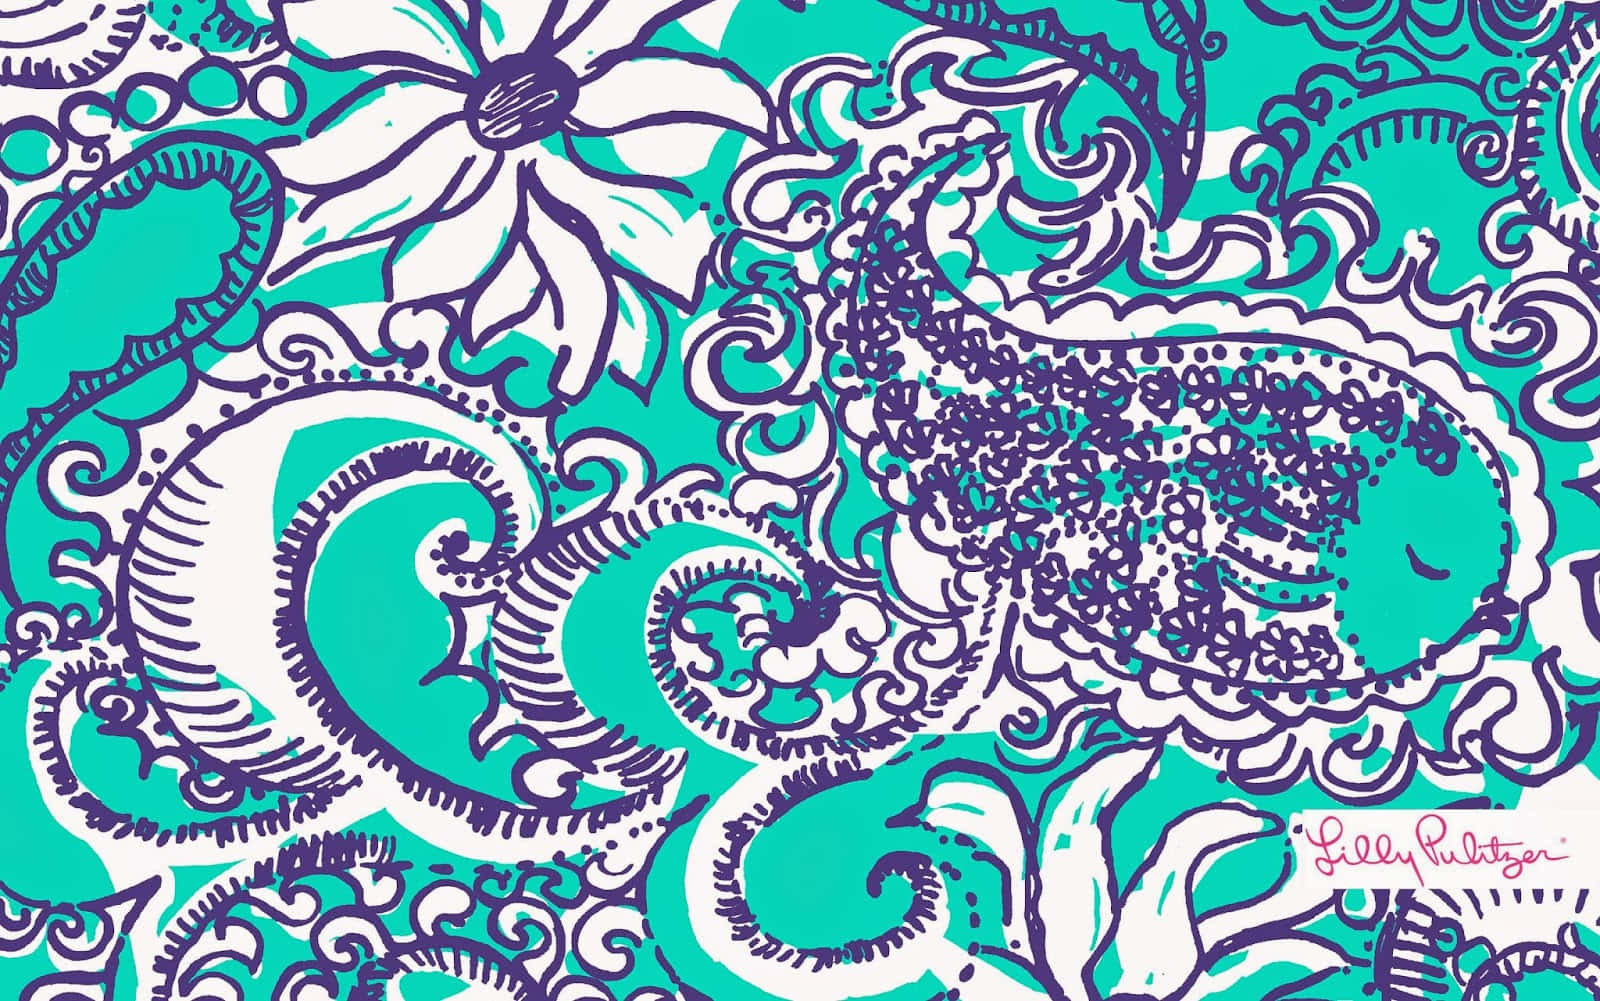 Let your wardrobe reflect your vibrant personality with Lilly Pulitzer